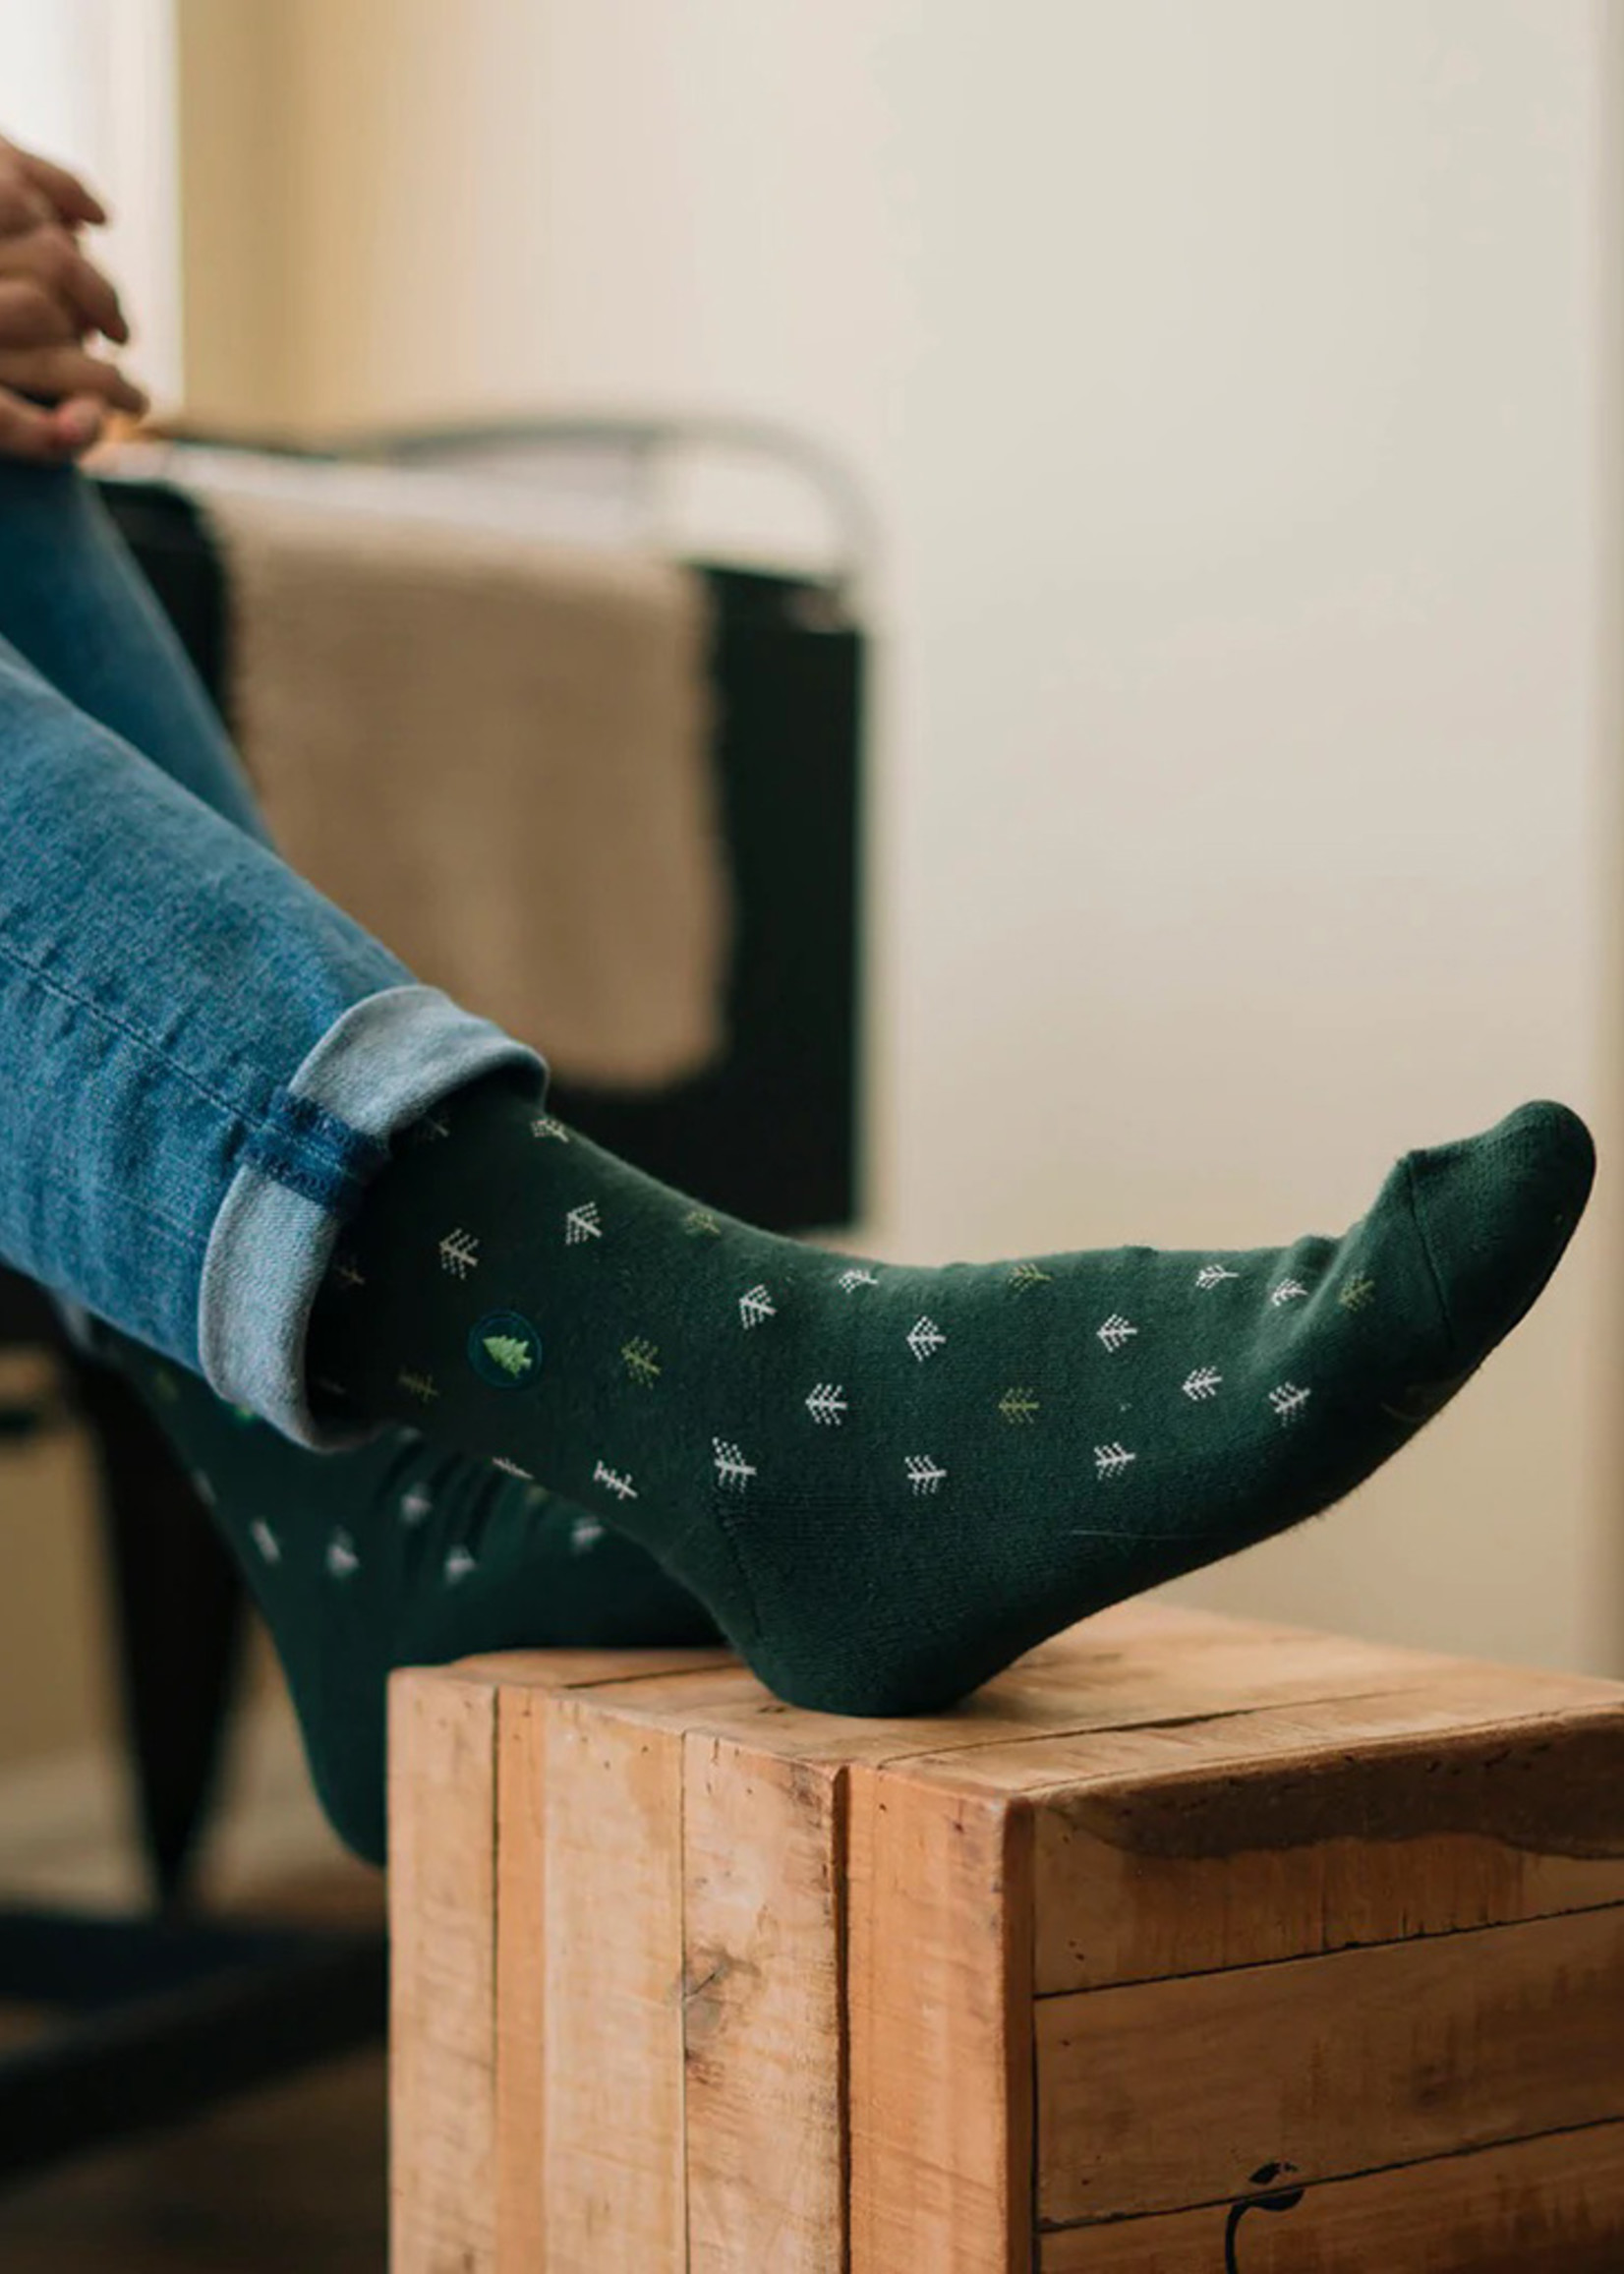 Conscious Step Men's Sock Box that Protect The Planet